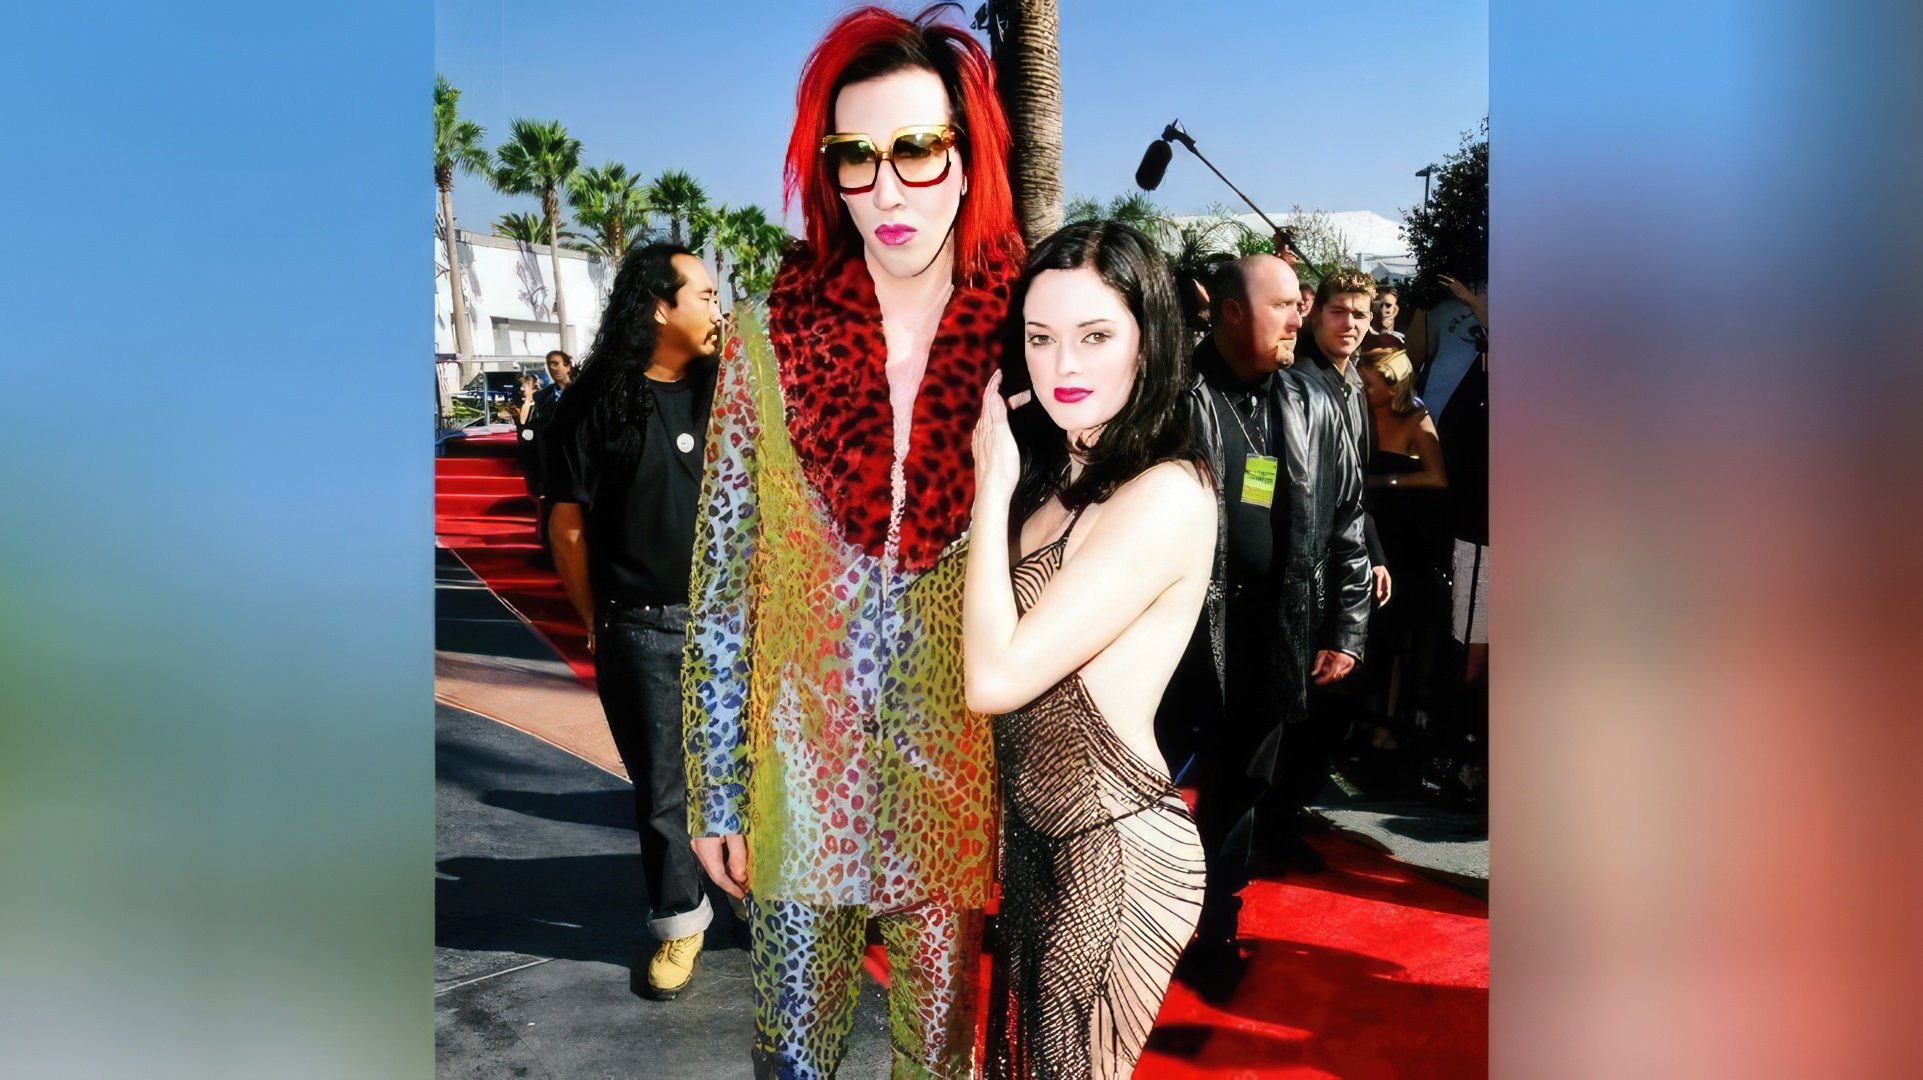 Marilyn Manson and his ex-girlfriend, actress Rose McGowan